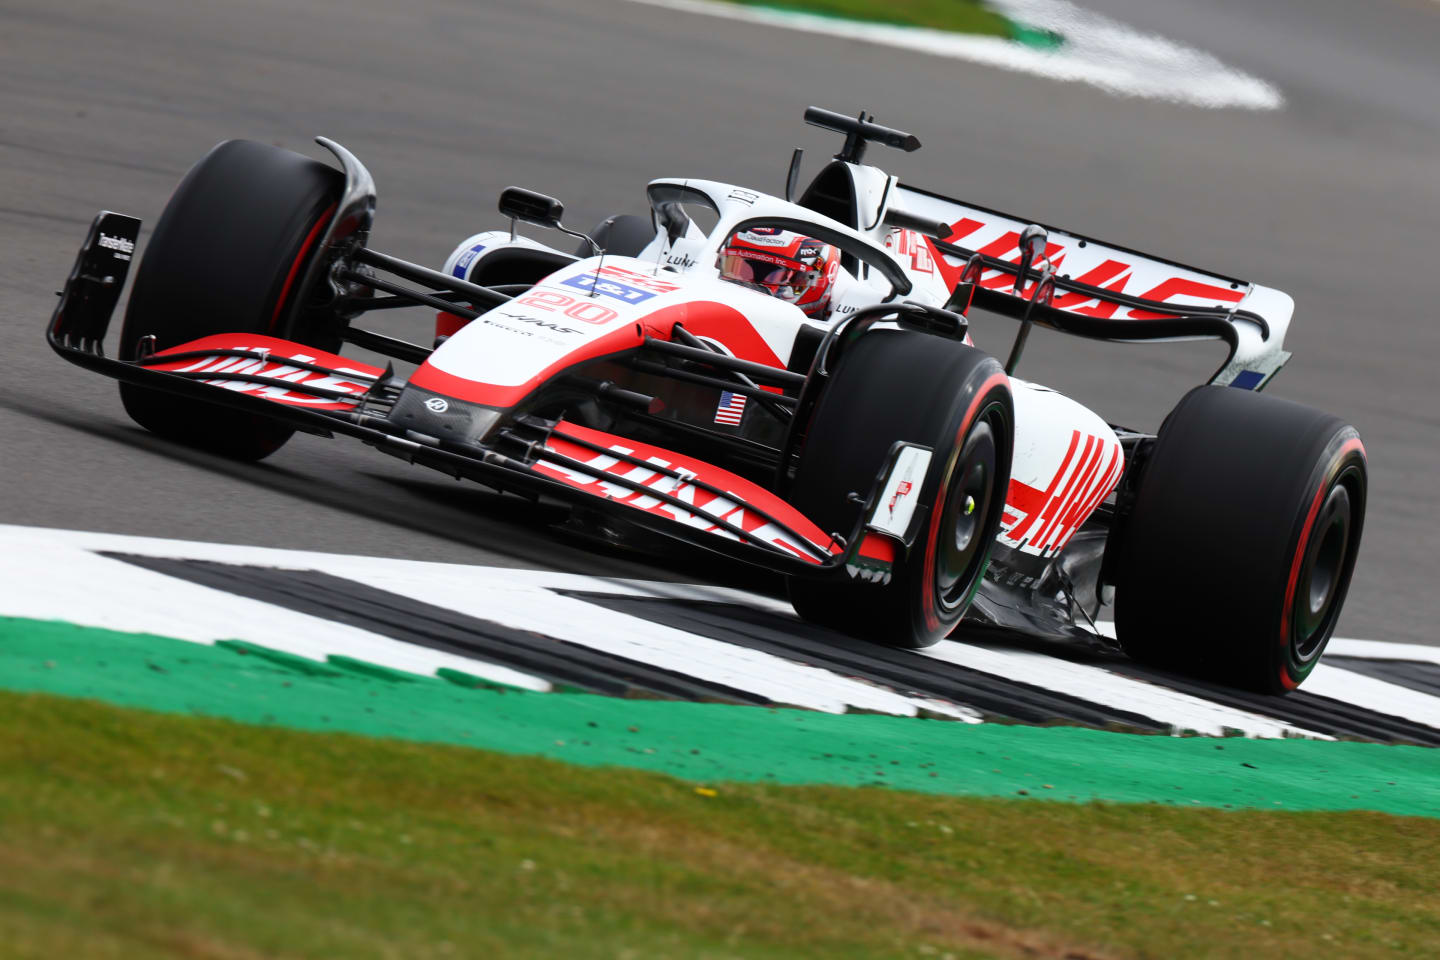 NORTHAMPTON, ENGLAND - JULY 01: Kevin Magnussen of Denmark driving the (20) Haas F1 VF-22 Ferrari on track during practice ahead of the F1 Grand Prix of Great Britain at Silverstone on July 01, 2022 in Northampton, England. (Photo by Mark Thompson/Getty Images)